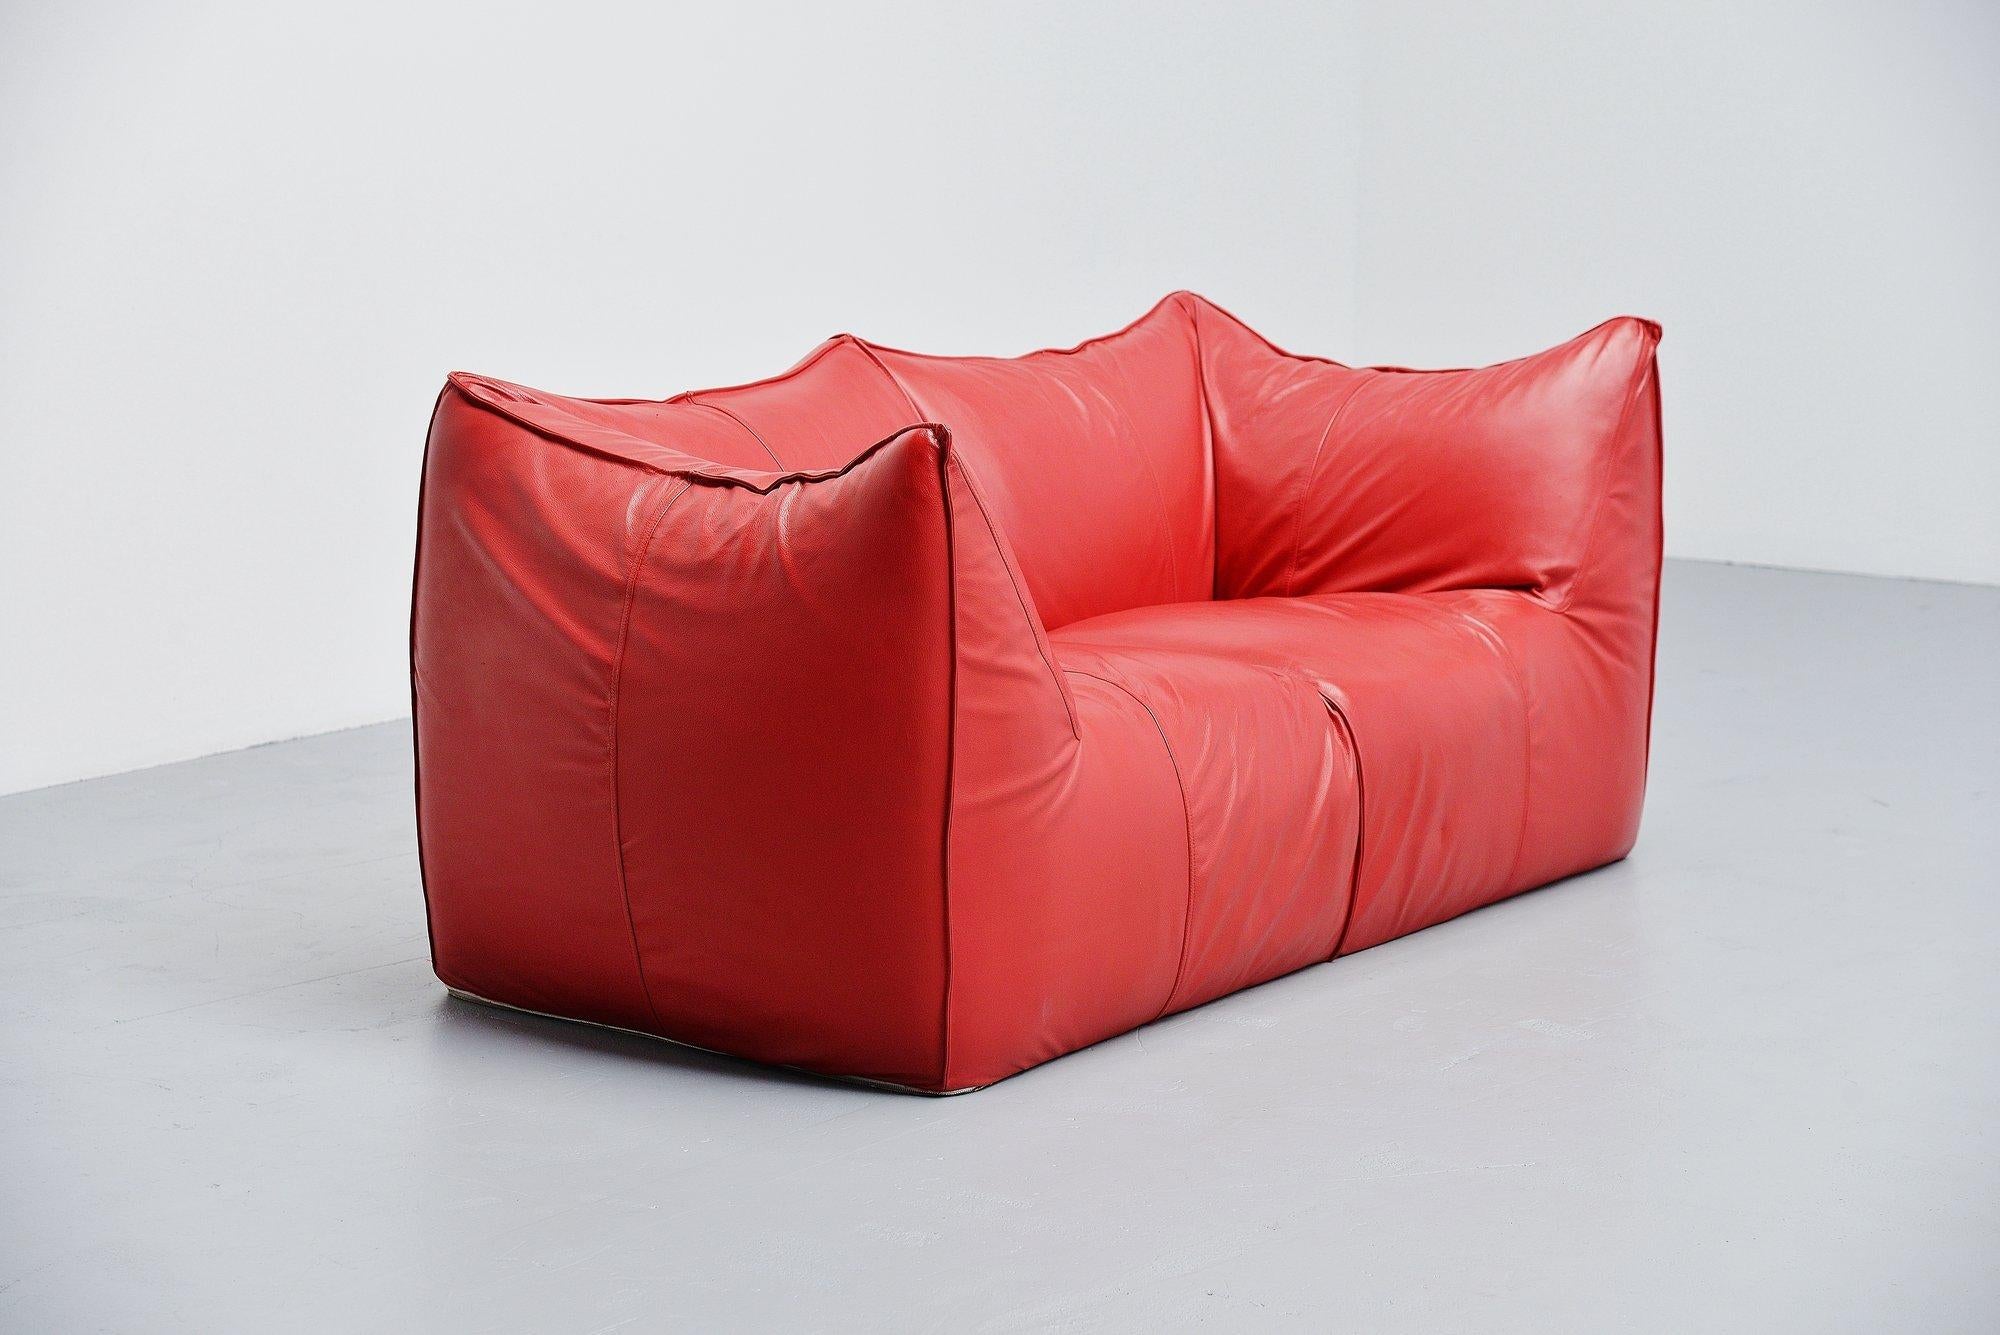 Super nice and comfortable so called ‘Bambole’ 2 seat sofa, designed by Mario Bellini and manufactured by B&B Italia in 1974. Very nice and high quality usable small loveseater sofa in the color of love. Very nice shaped sofa made of very thick and